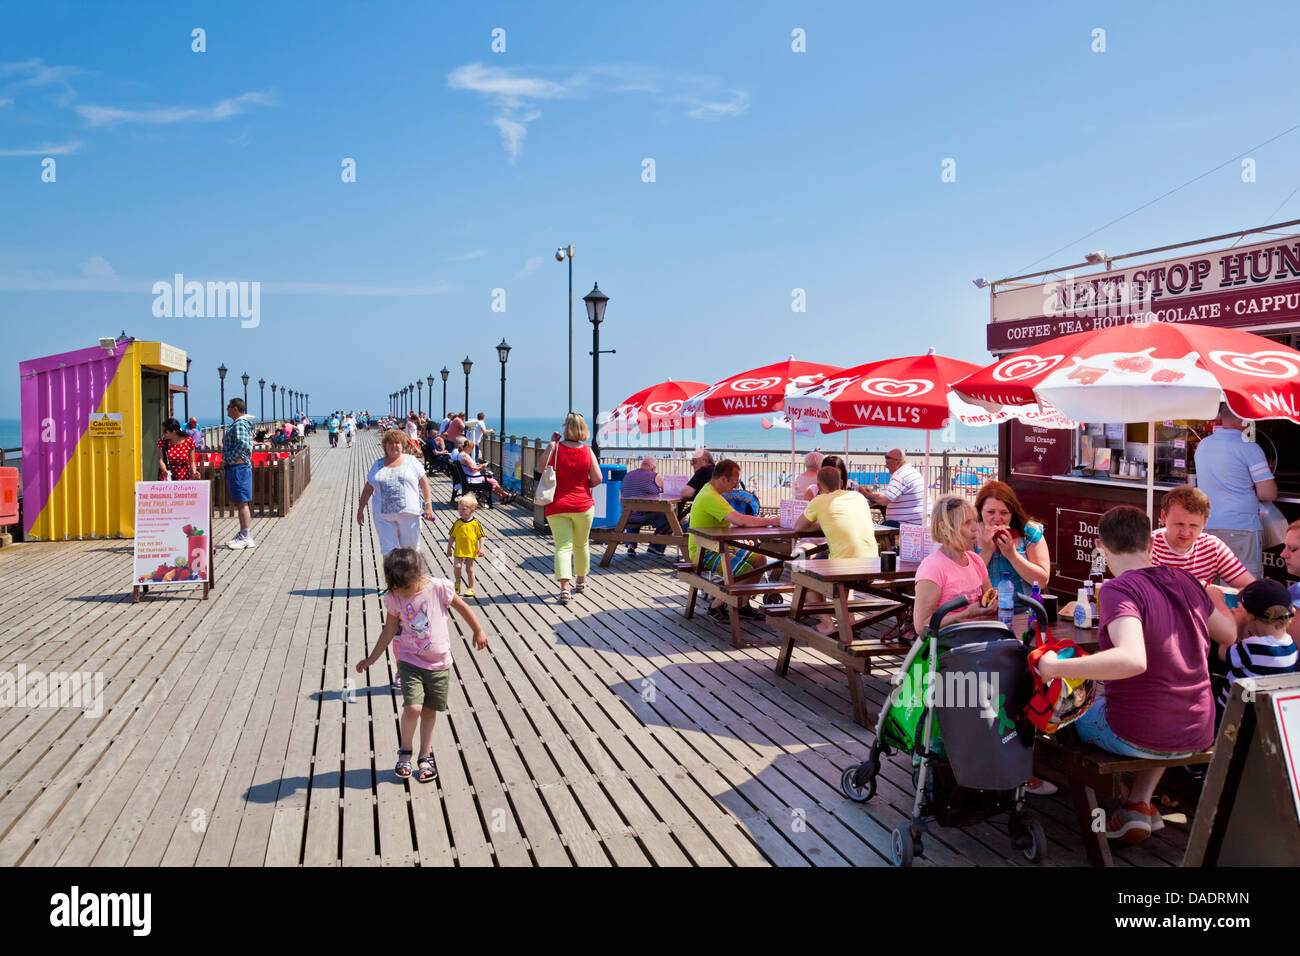 Tourists outside a cafe with umbrellas on the Pier at Skegness on a sunny day Lincolnshire England UK GB EU Europe Stock Photo